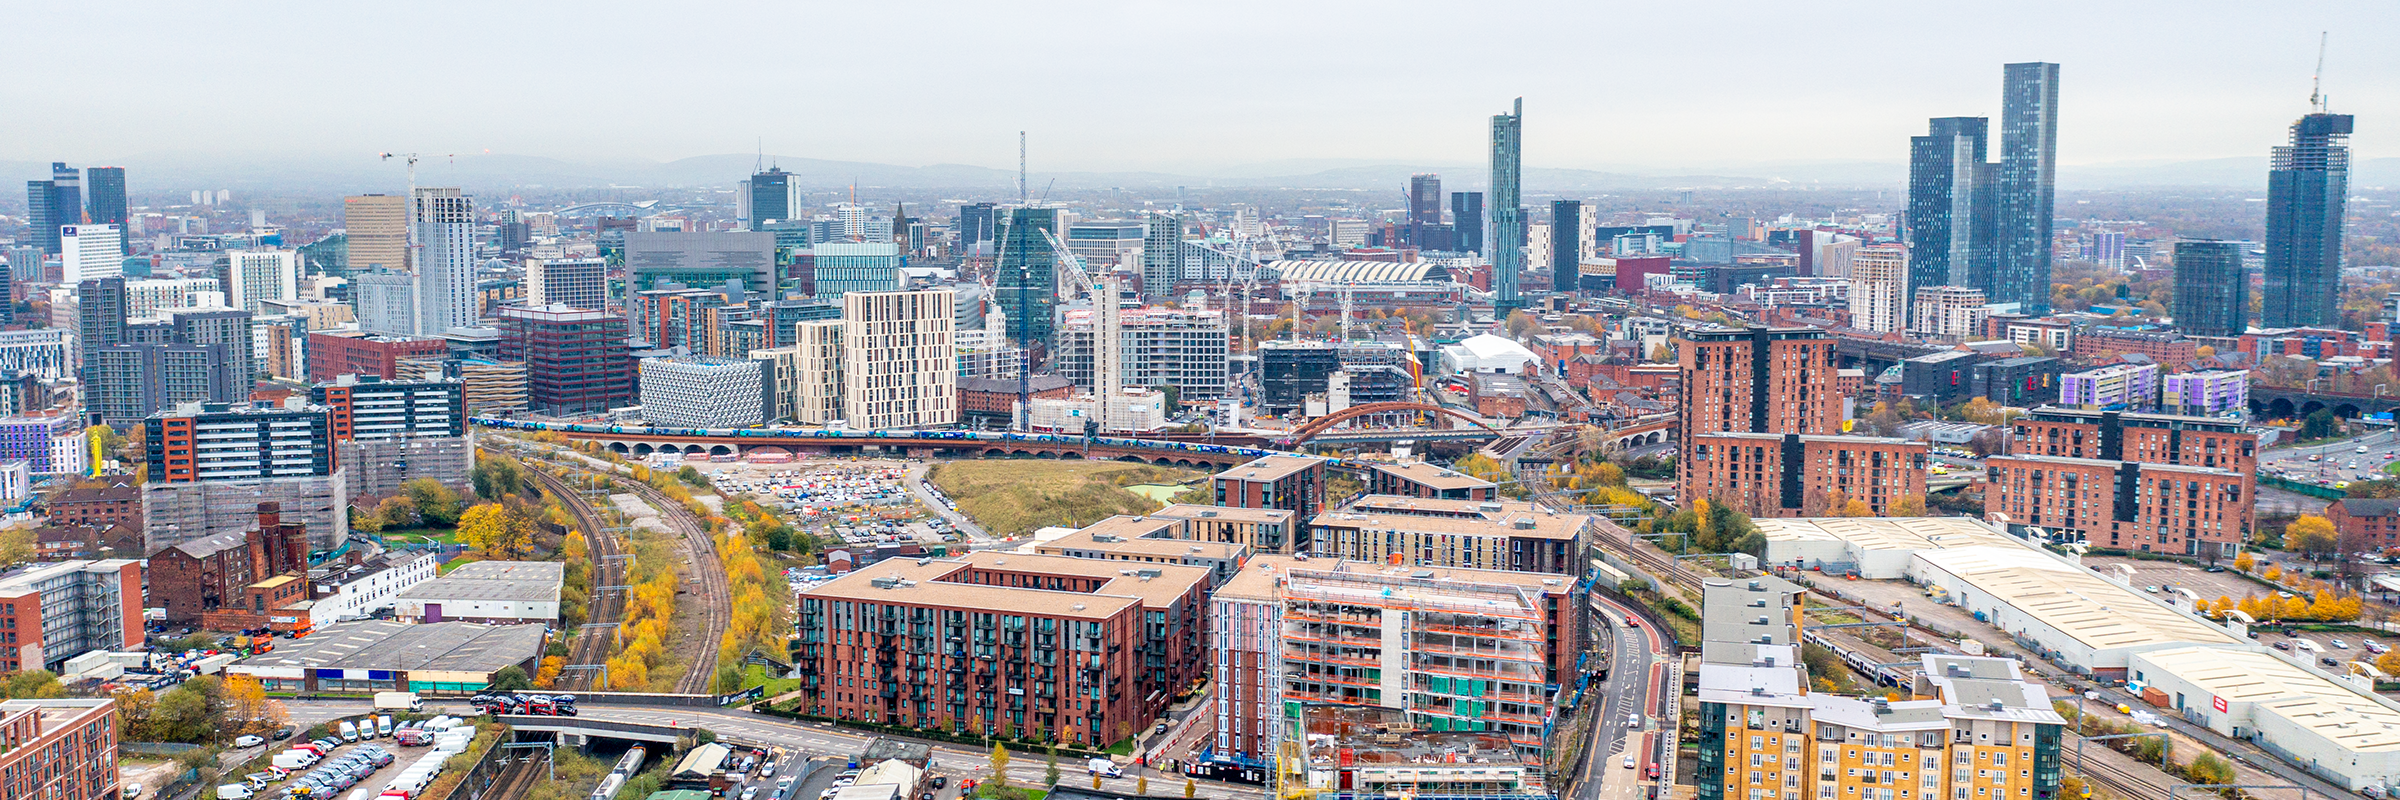 Manchester skyline, buildings and roads